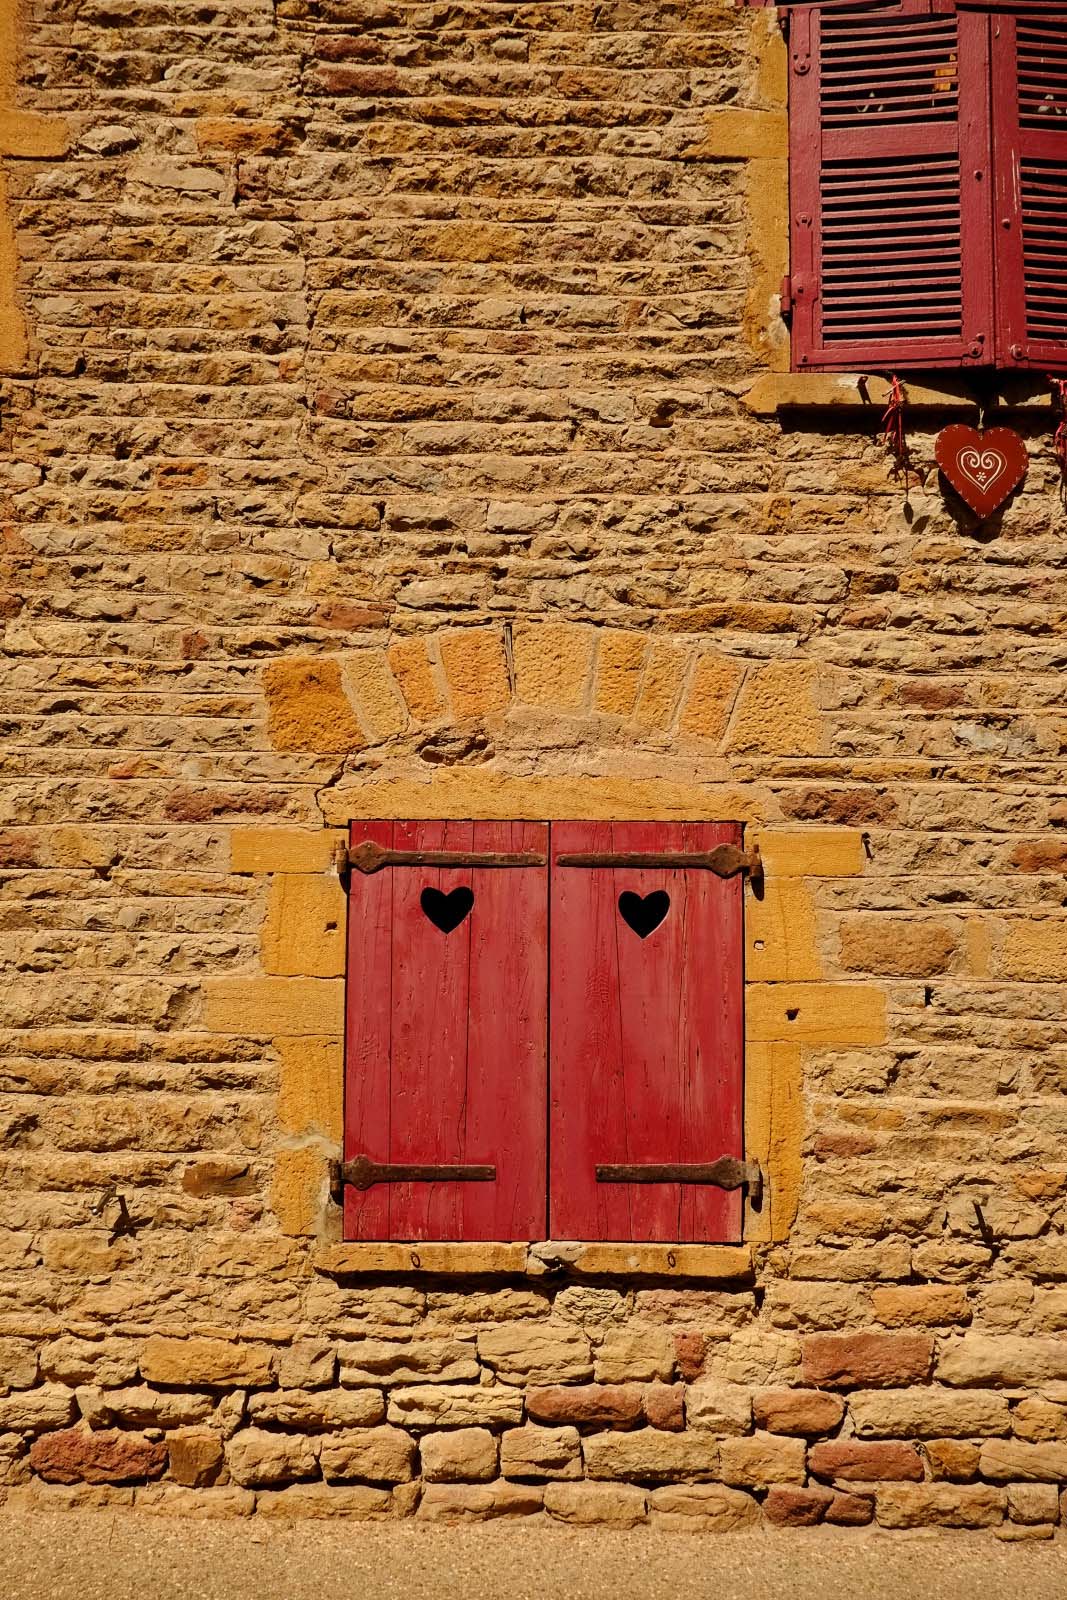 Red shutters and carved hearts feature in the golden stone house walls of Oint. Photography by Kent Johnson.